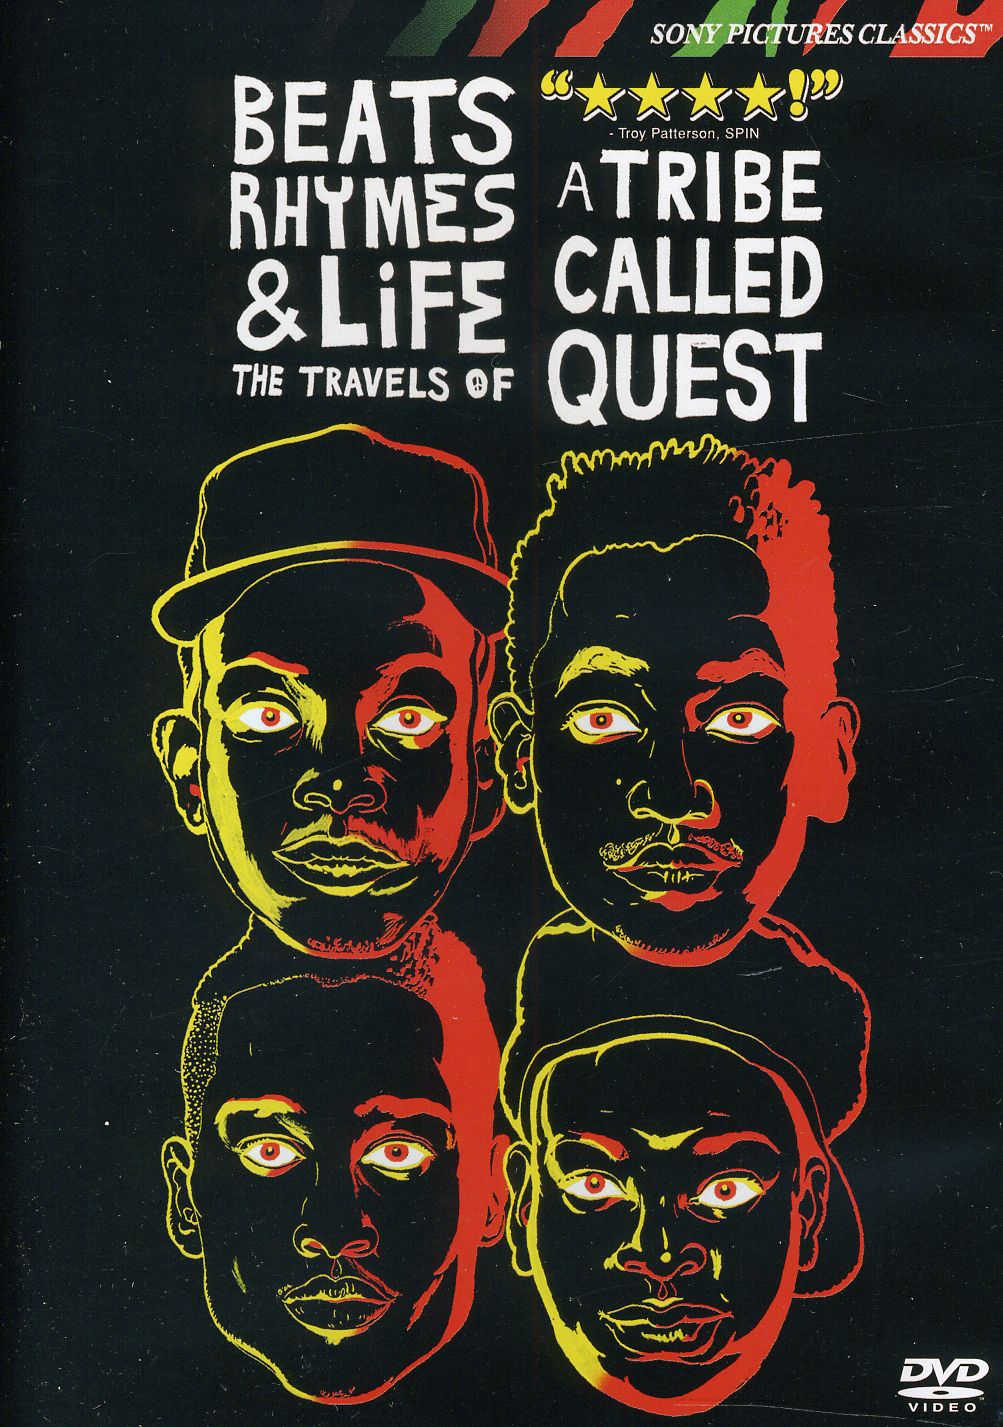 BEATS RHYMES & LIFE: TRAVELS OF TRIBE CALLED QUEST